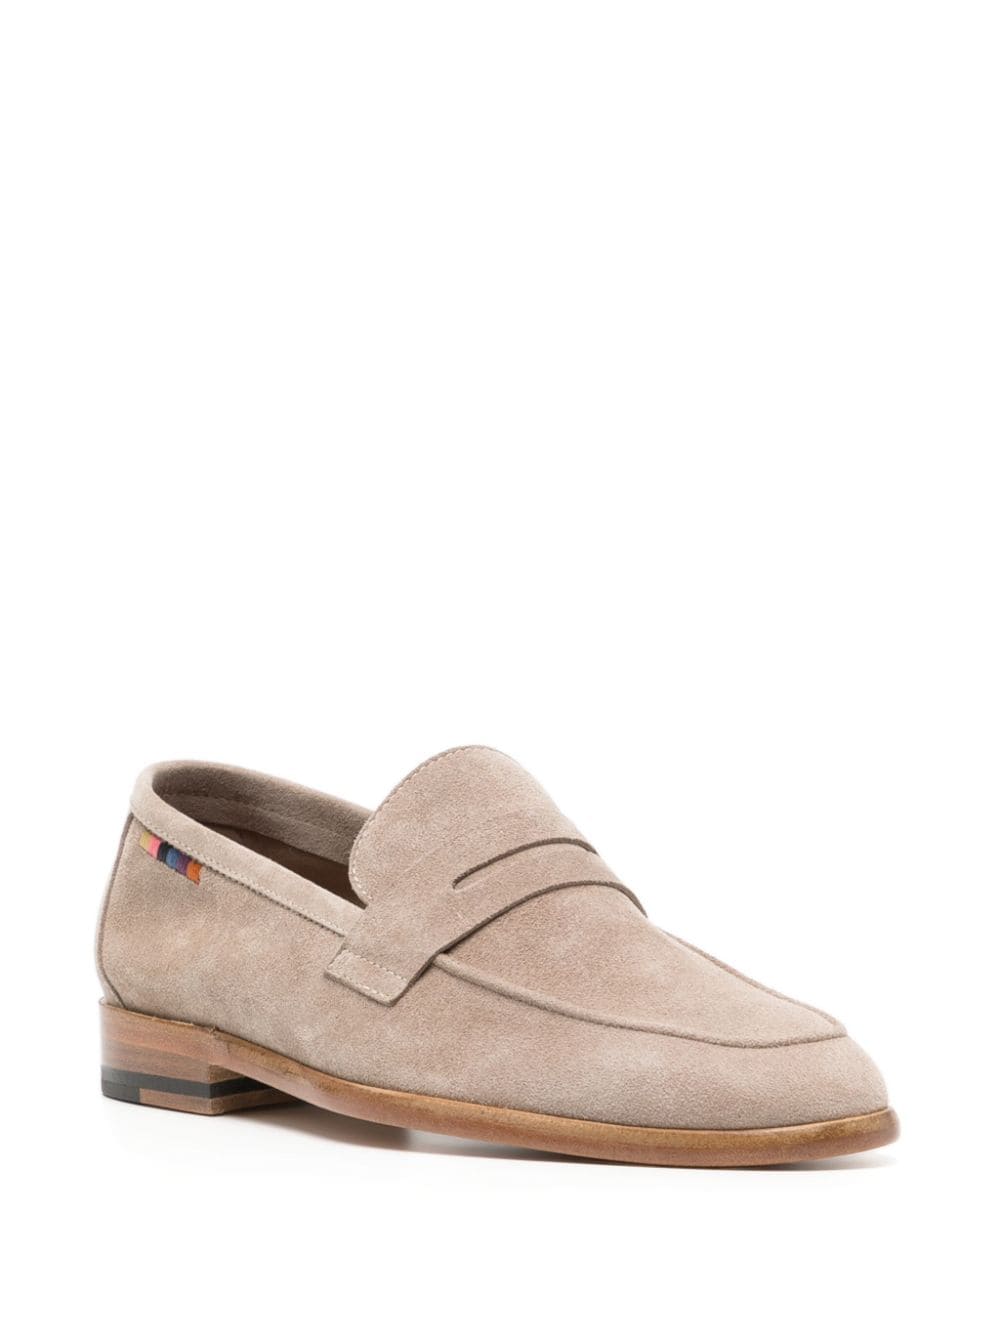 Paul Smith Figaro suede loafers - Beige